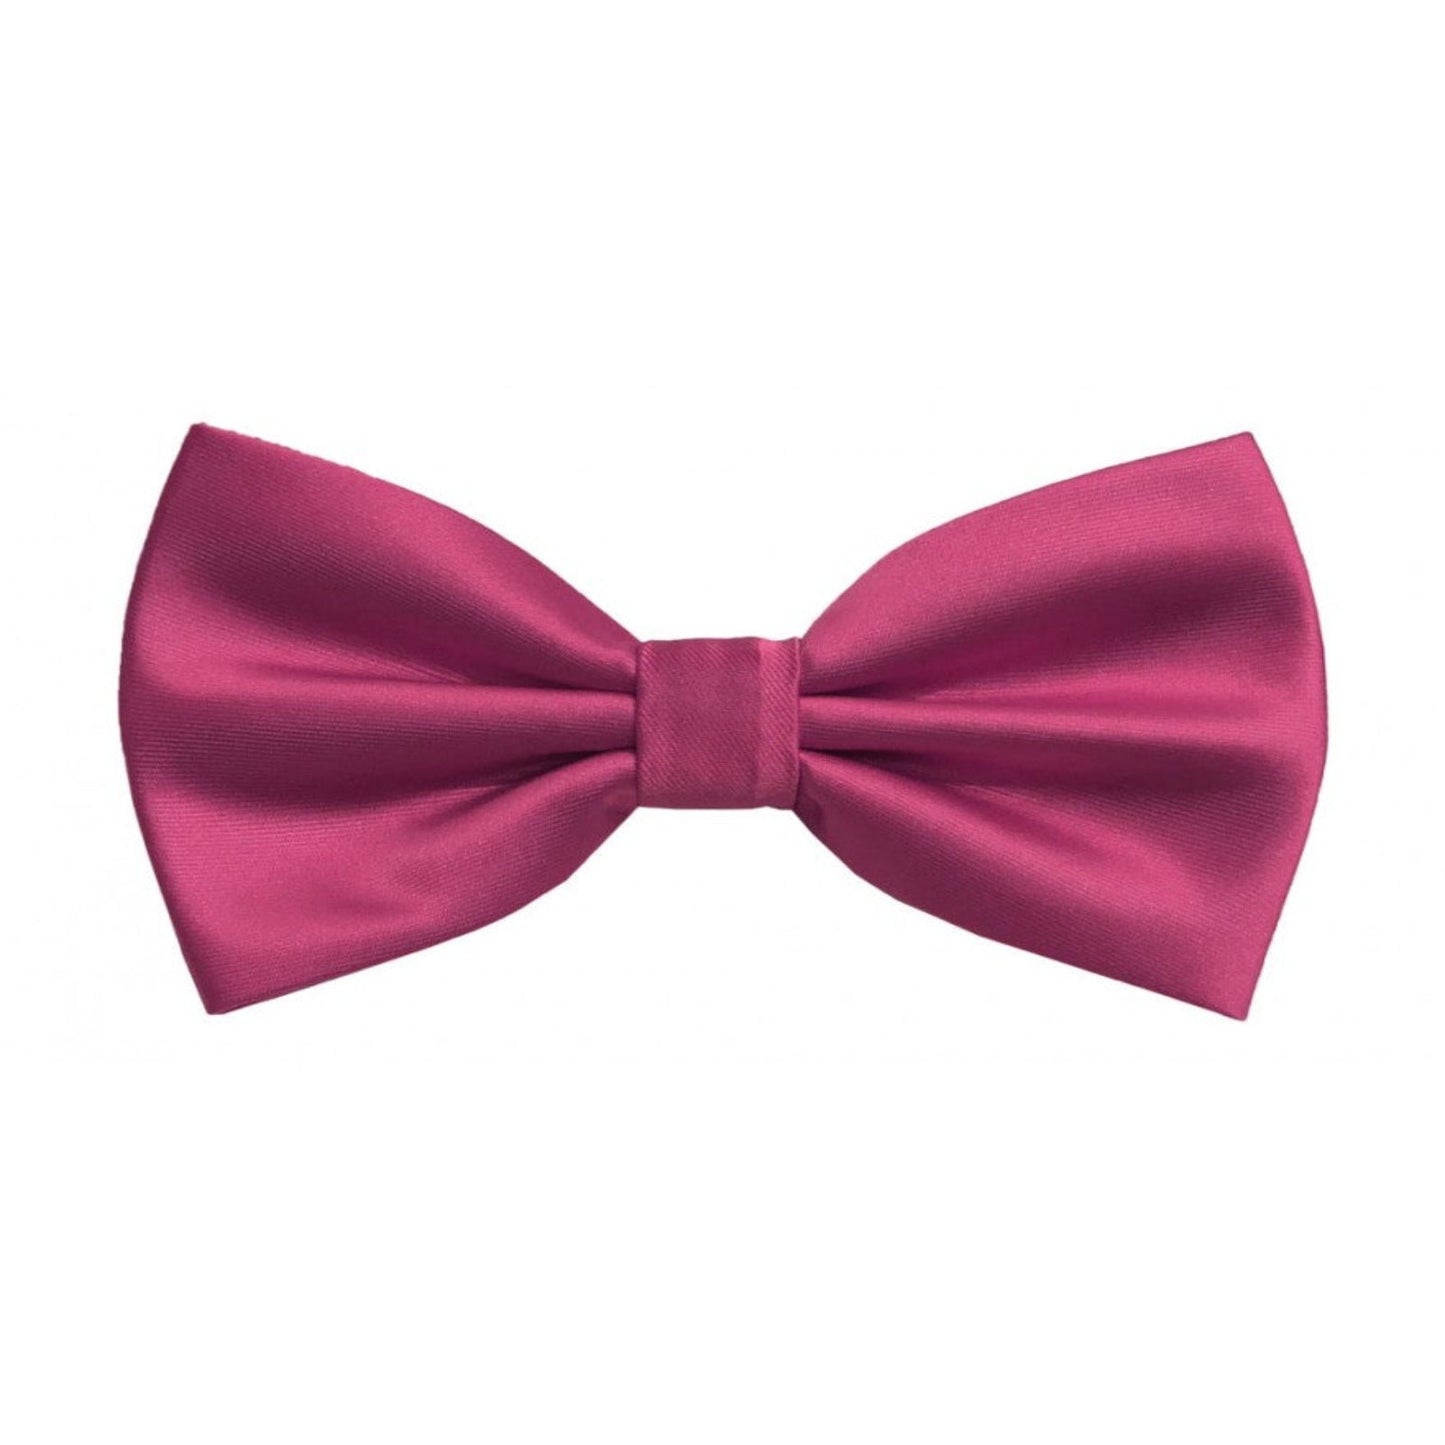 Classic French Rose Bowtie With Matching Pocket Square | KCT Menswear 